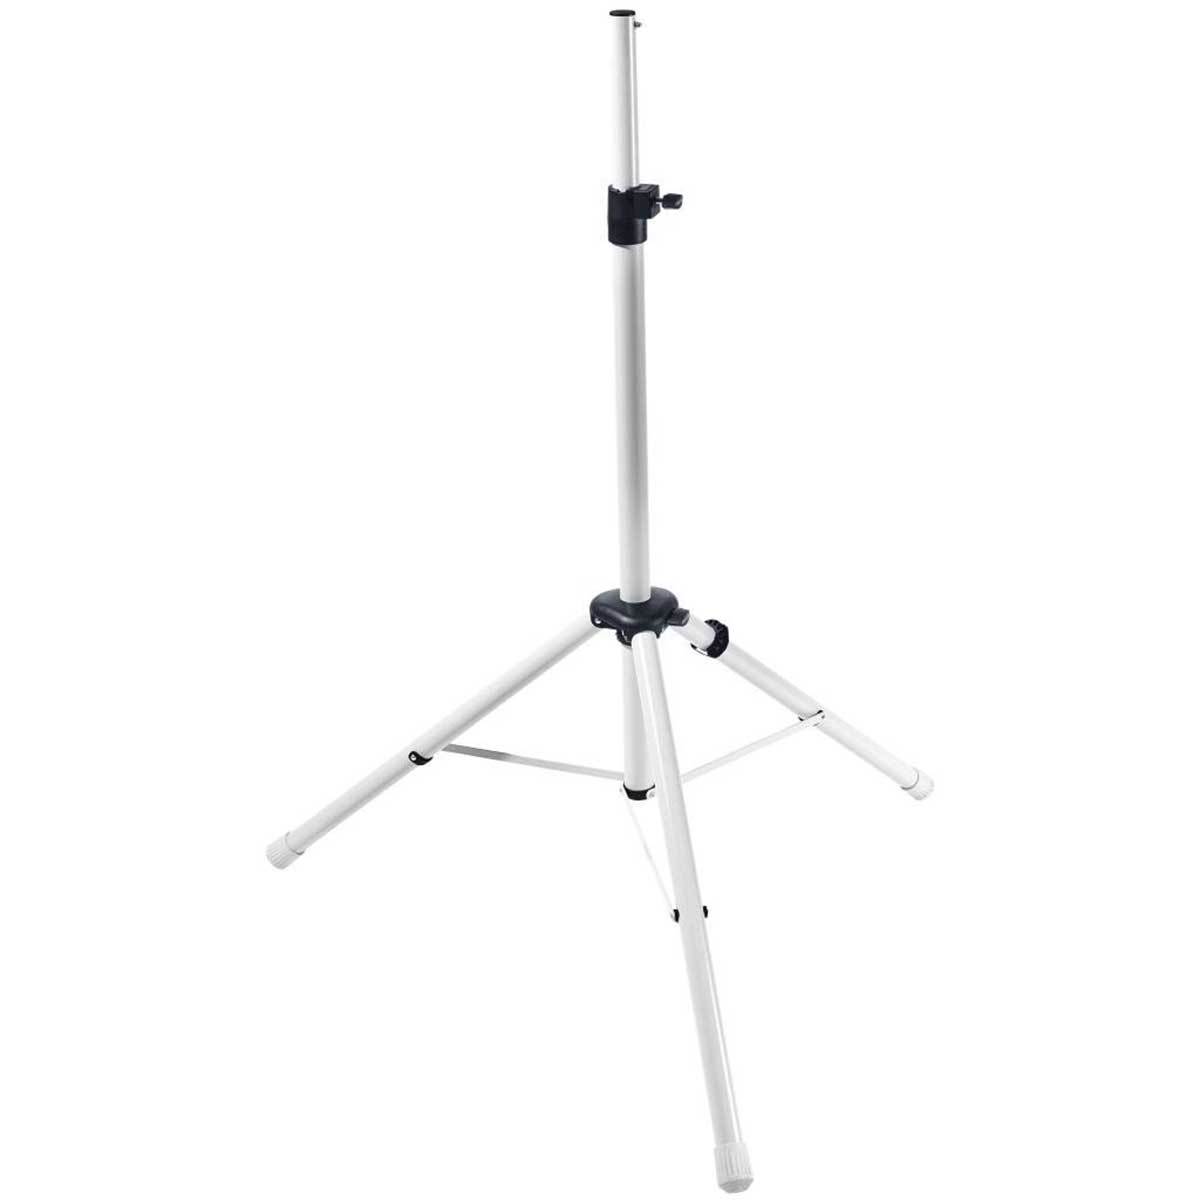 The sturdy, well-built tripod has a wide stance that is exceptionally stable. Thumb screws lock adjustments.